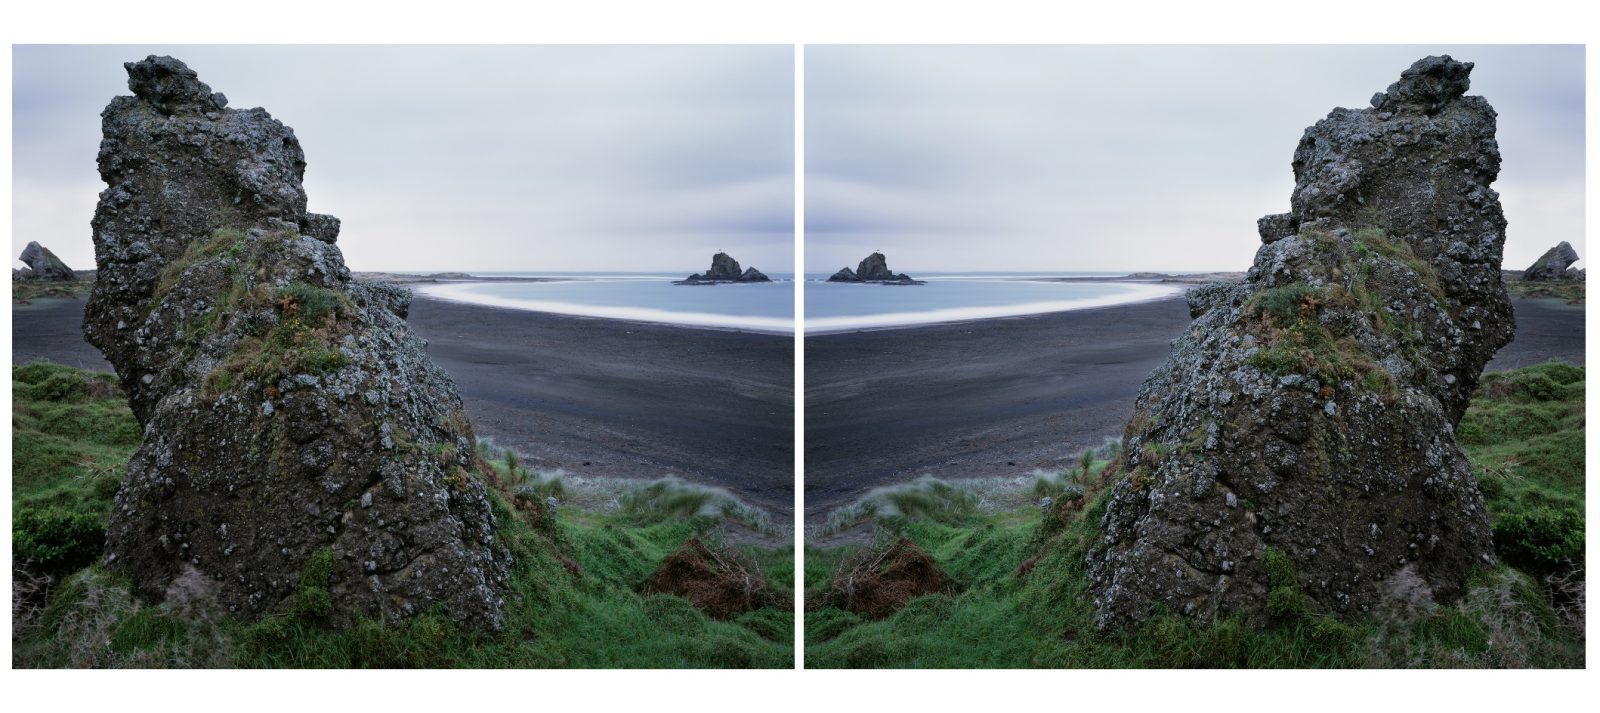 Siren, Whatipu, Manukau Harbour Entrance, 2008 Diptych, C-type photographs 750 x 930 mm each NZD 9,000 Edition 1 of 5